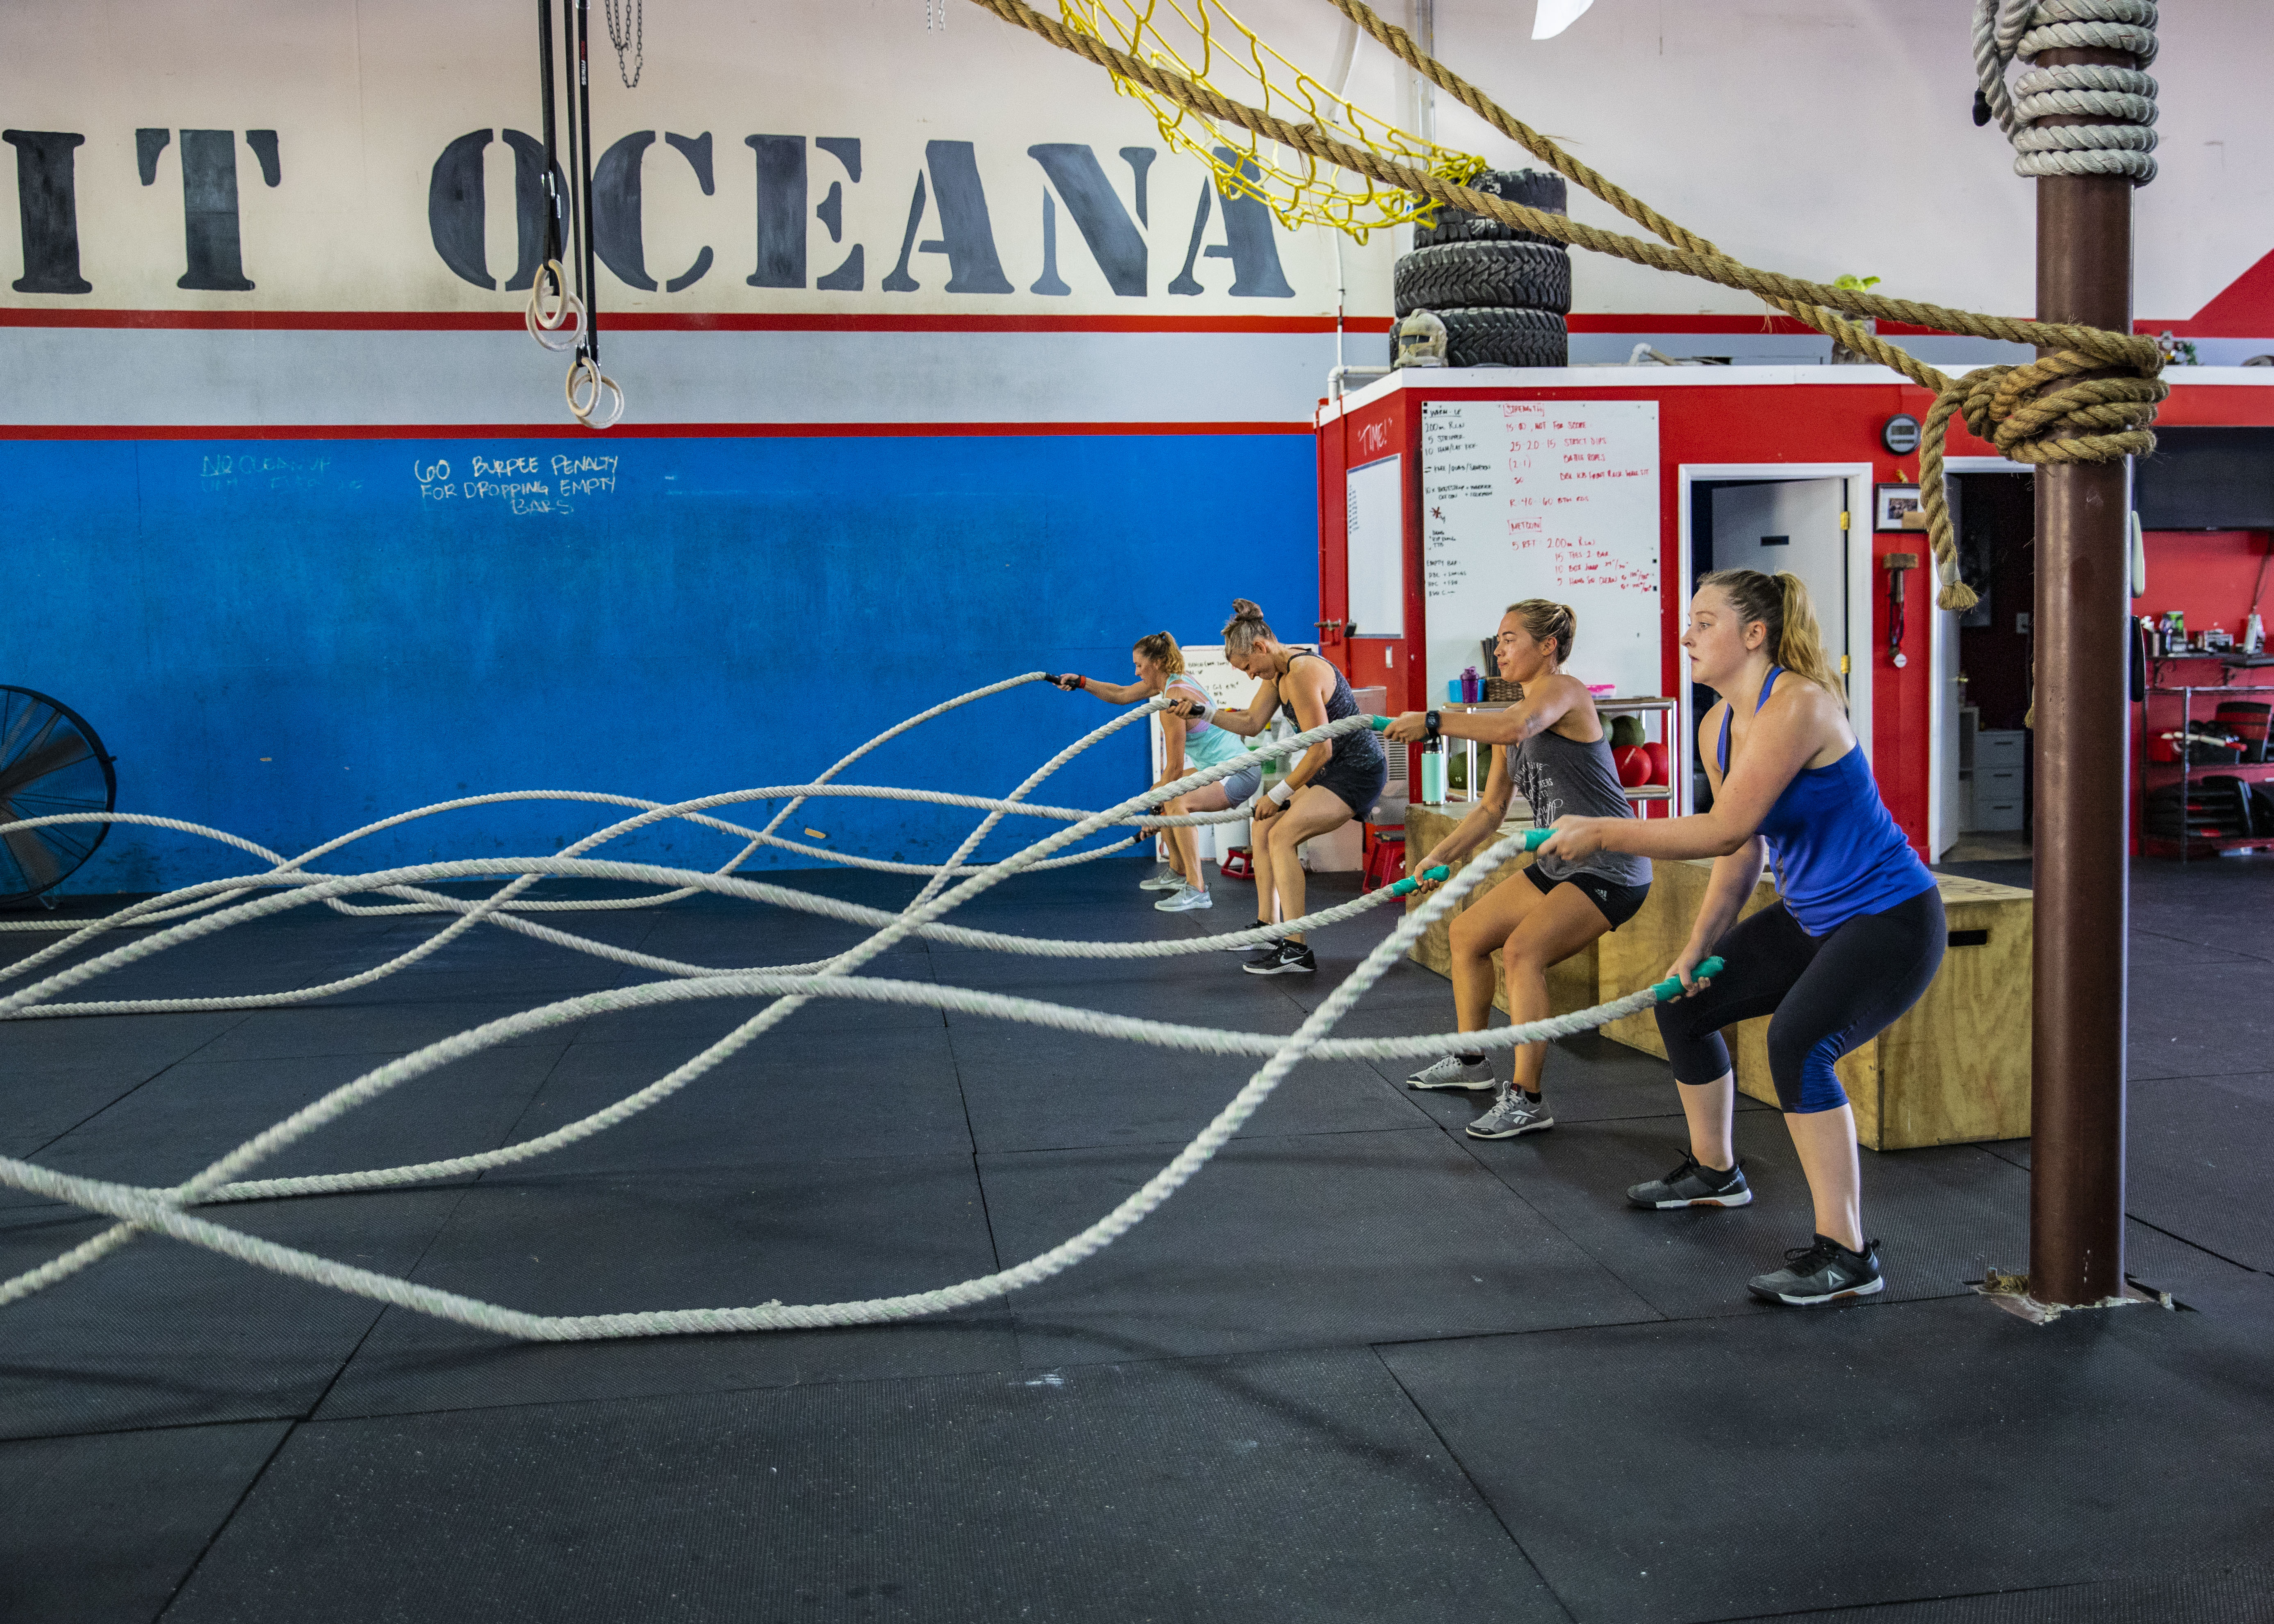 crossfit oceana, misty saves the day